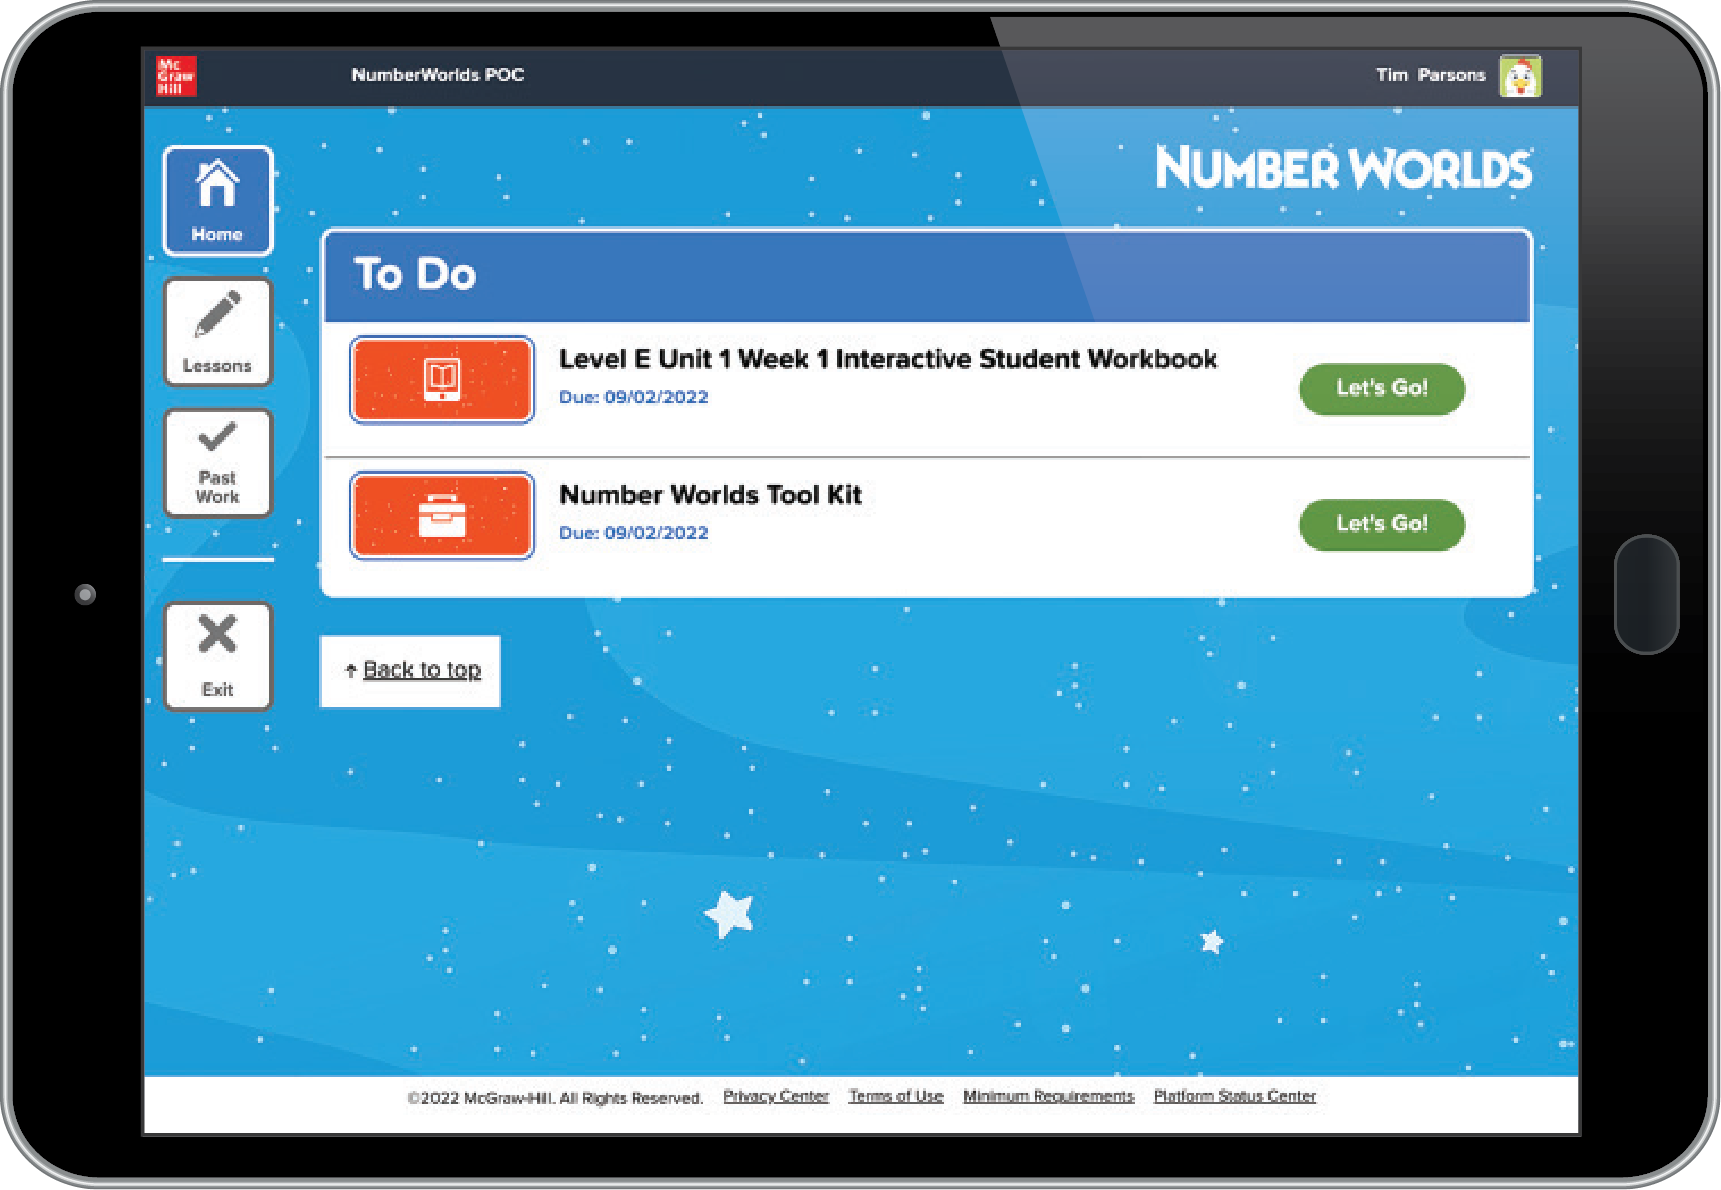 Number Worlds student dashboard on tablet showing to do list items